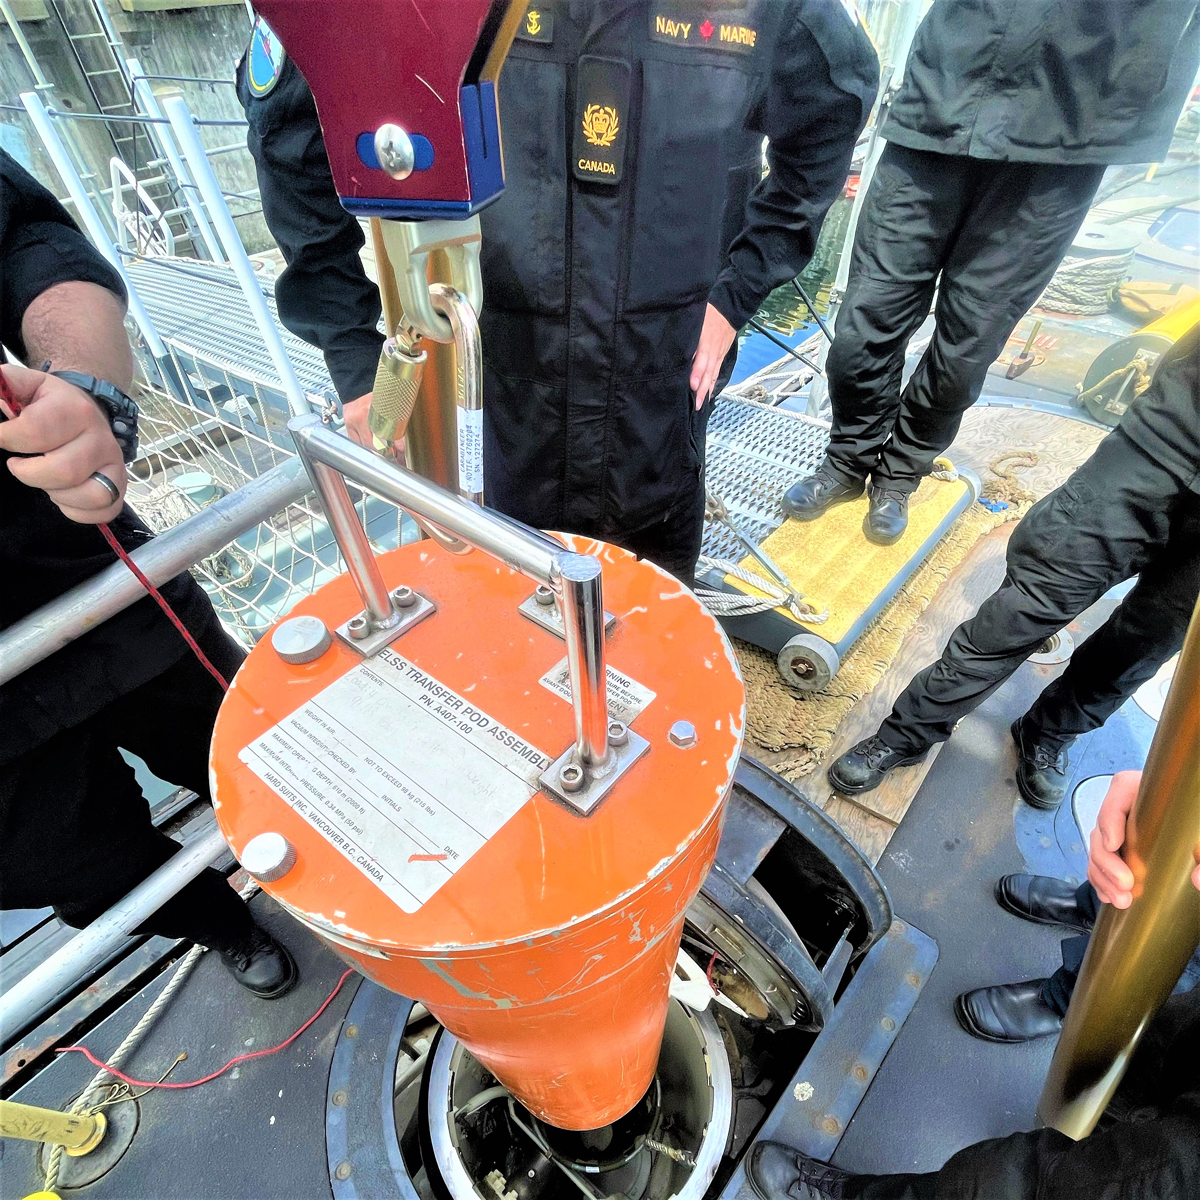 Member’s of CANSUBFOR placing the ELSS pod into the posting bag onboard HMCS Chicoutimi.
